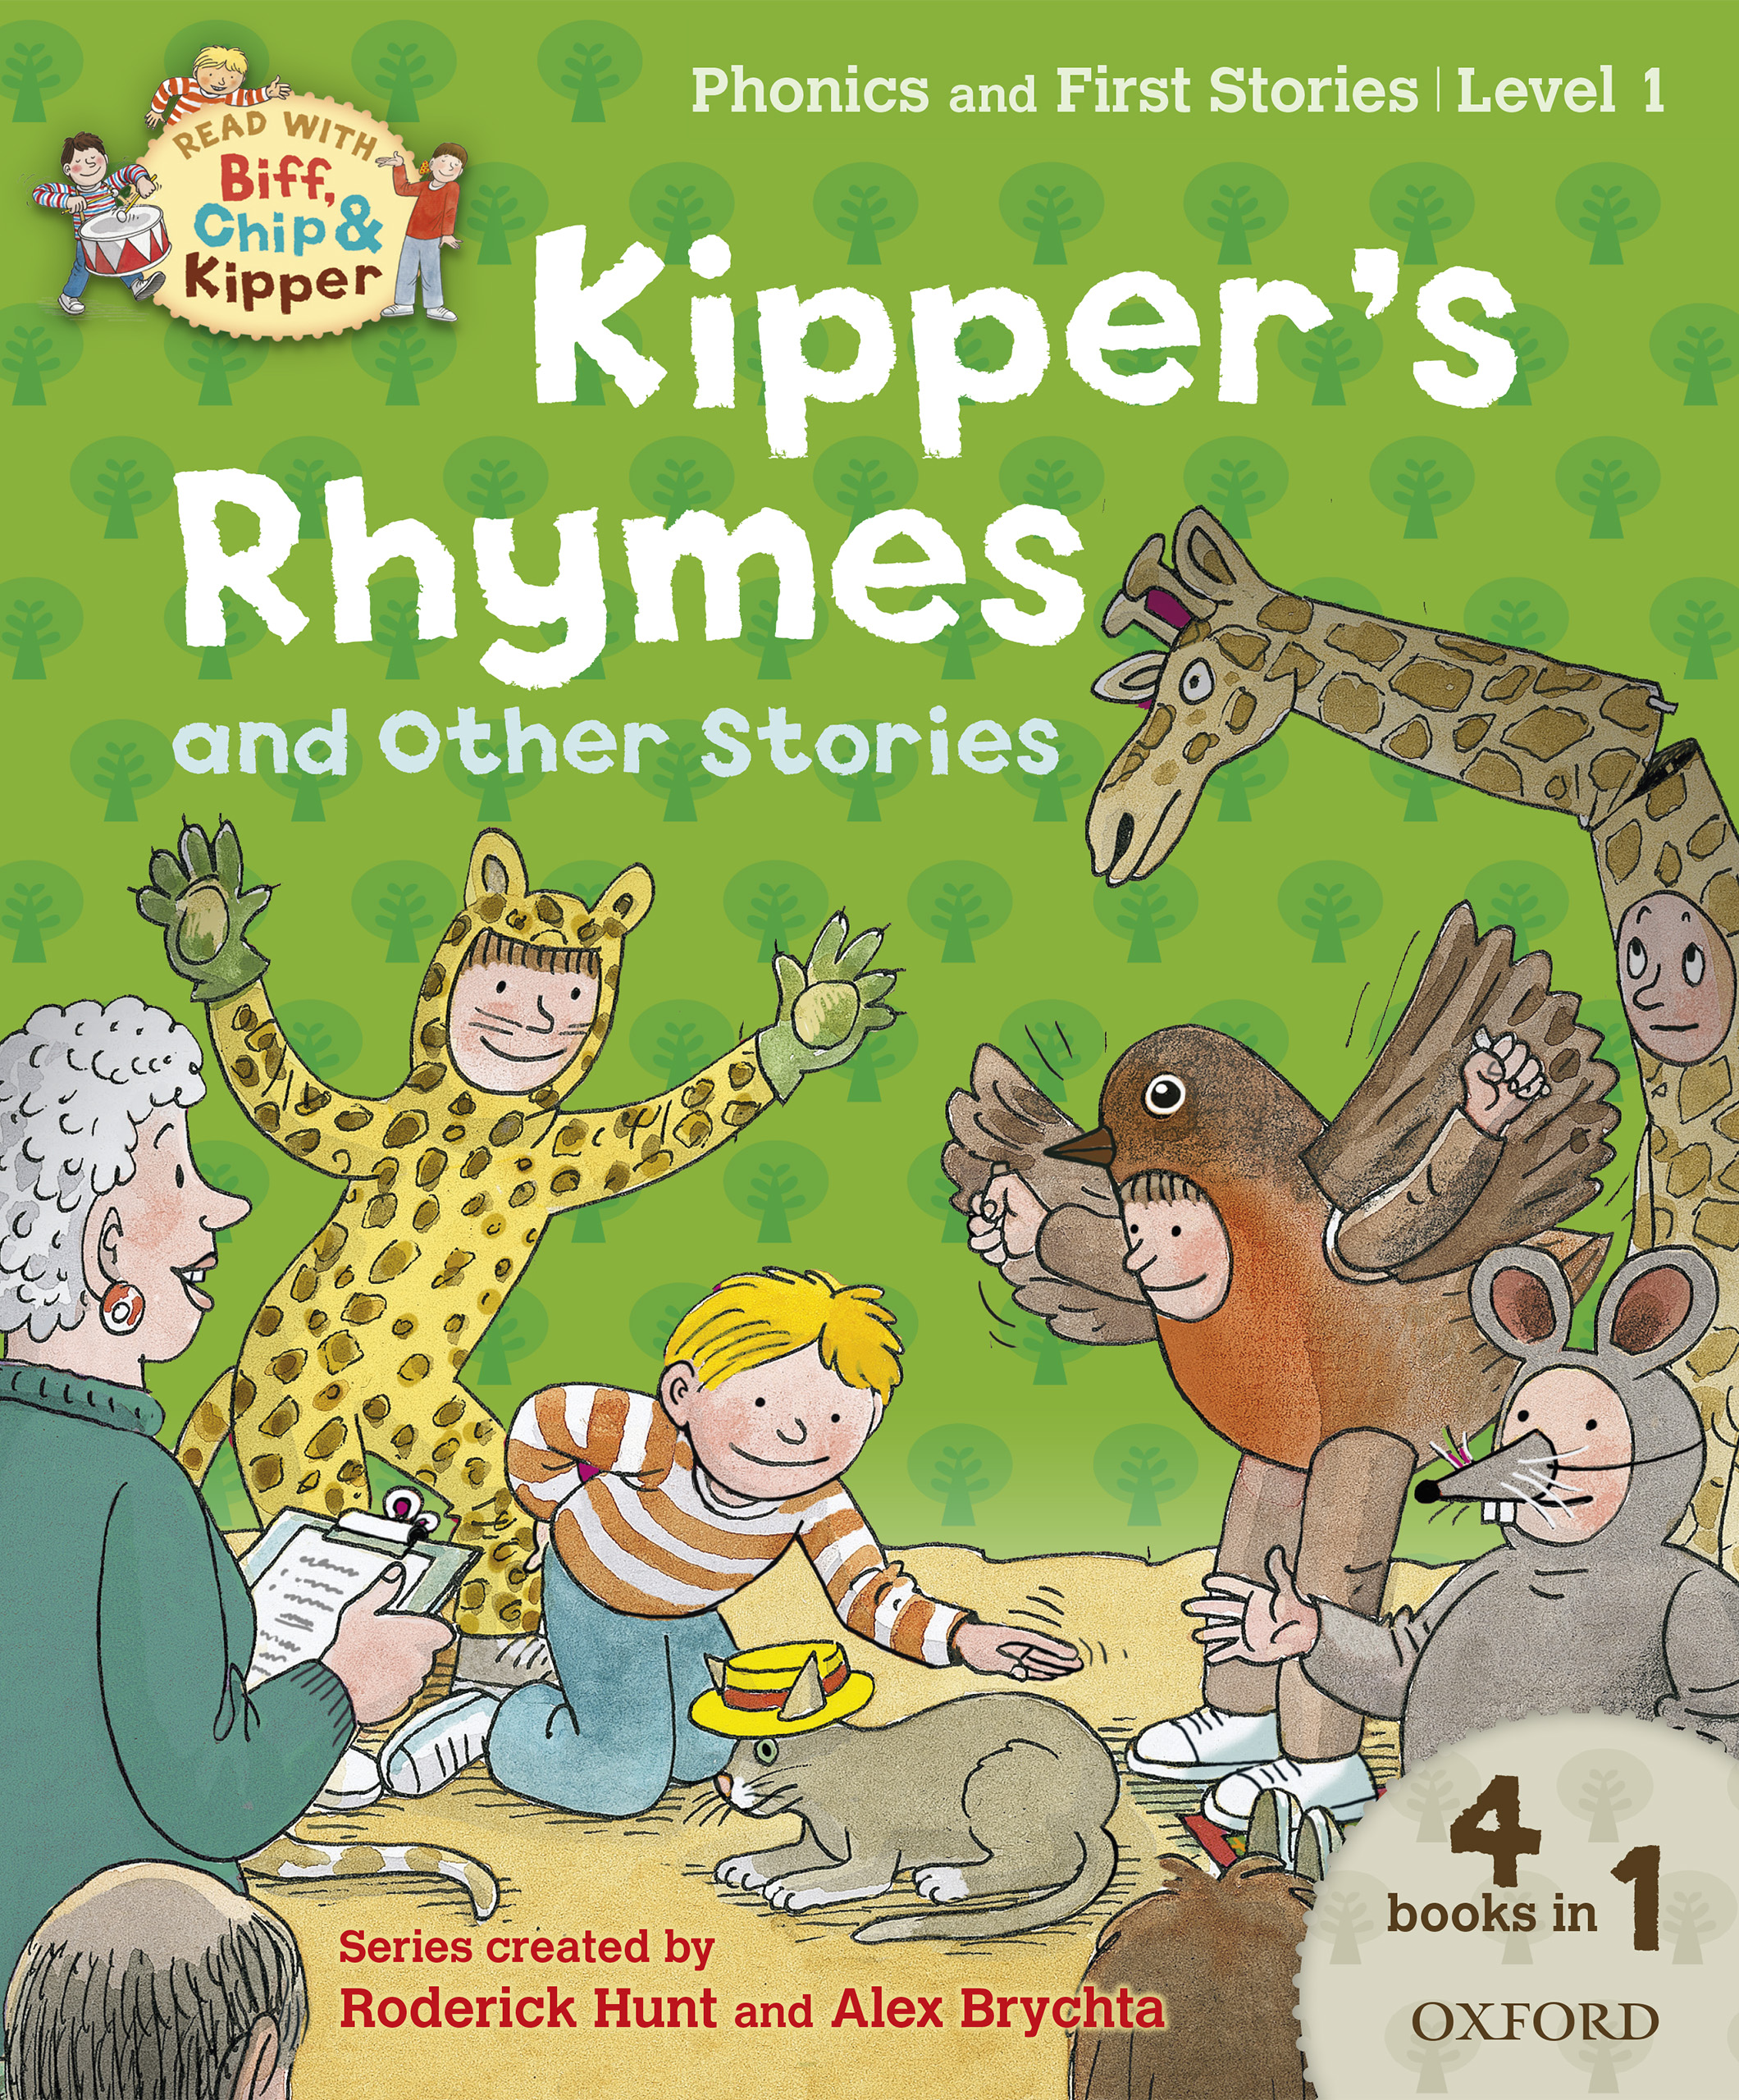 biff chip and kipper stories level 1